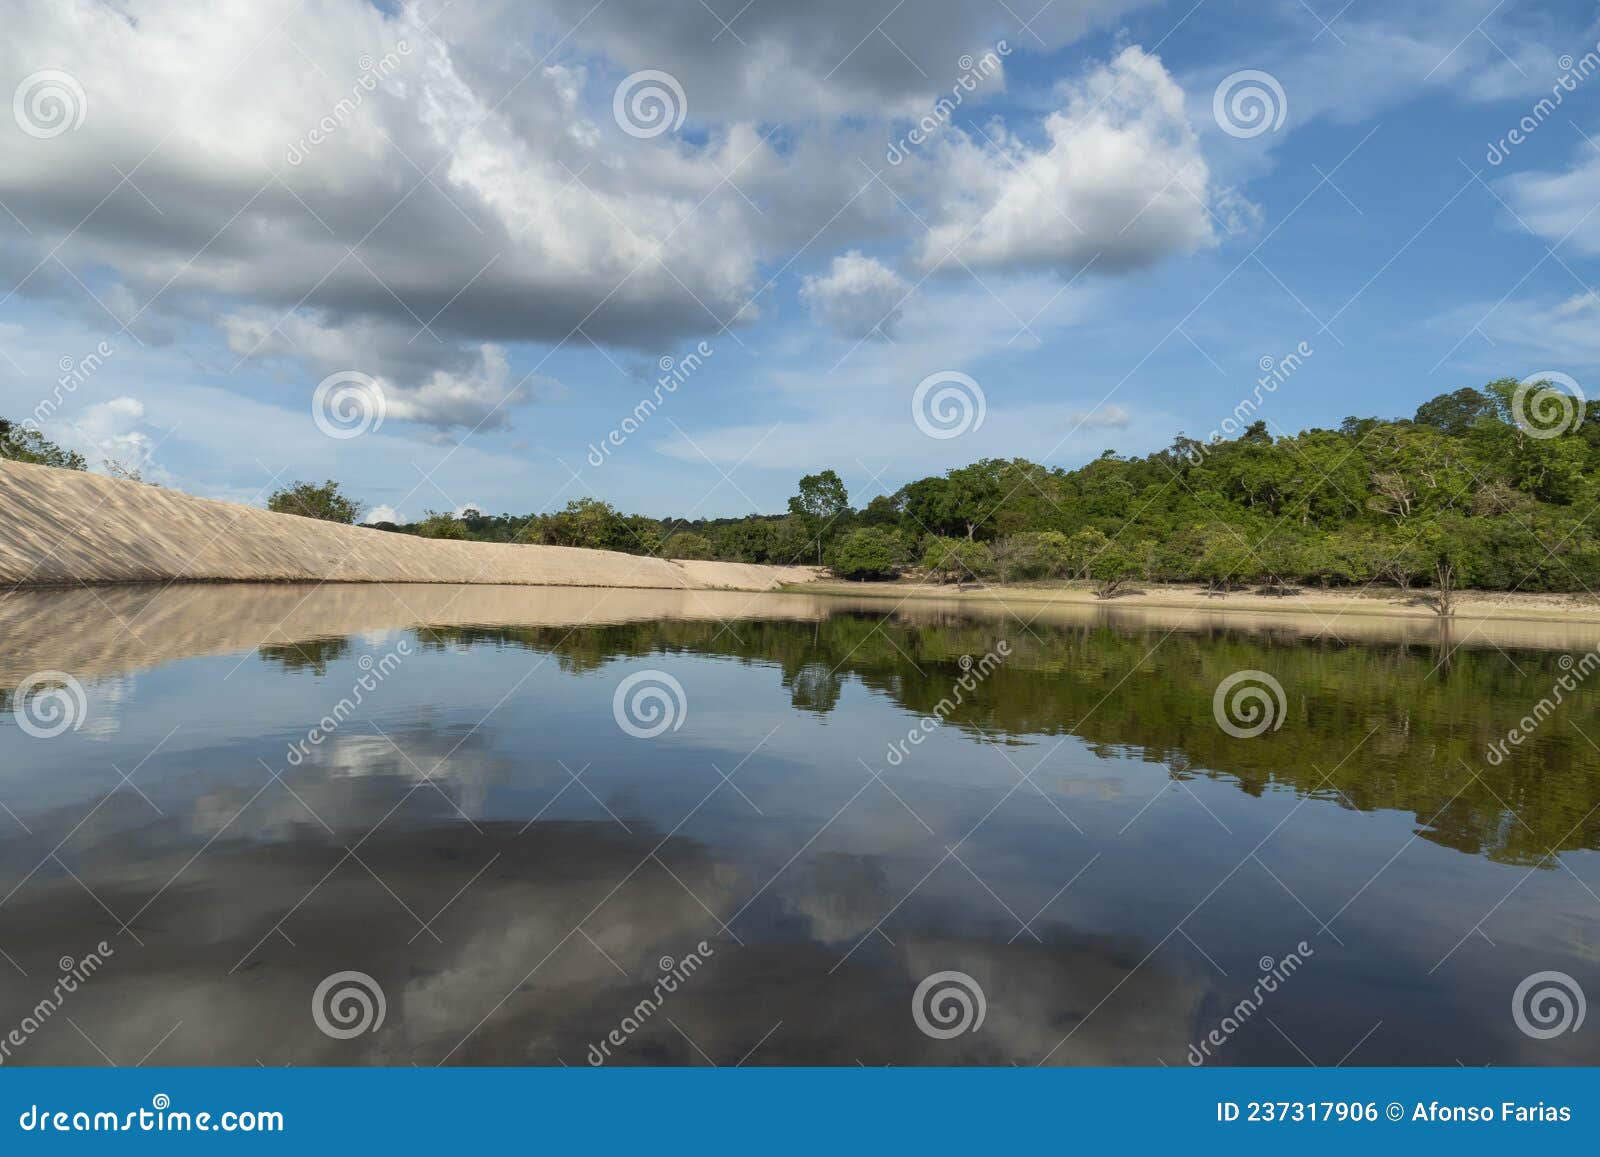 reflections in water. landscape in the tapajos river, brazilian amazon.